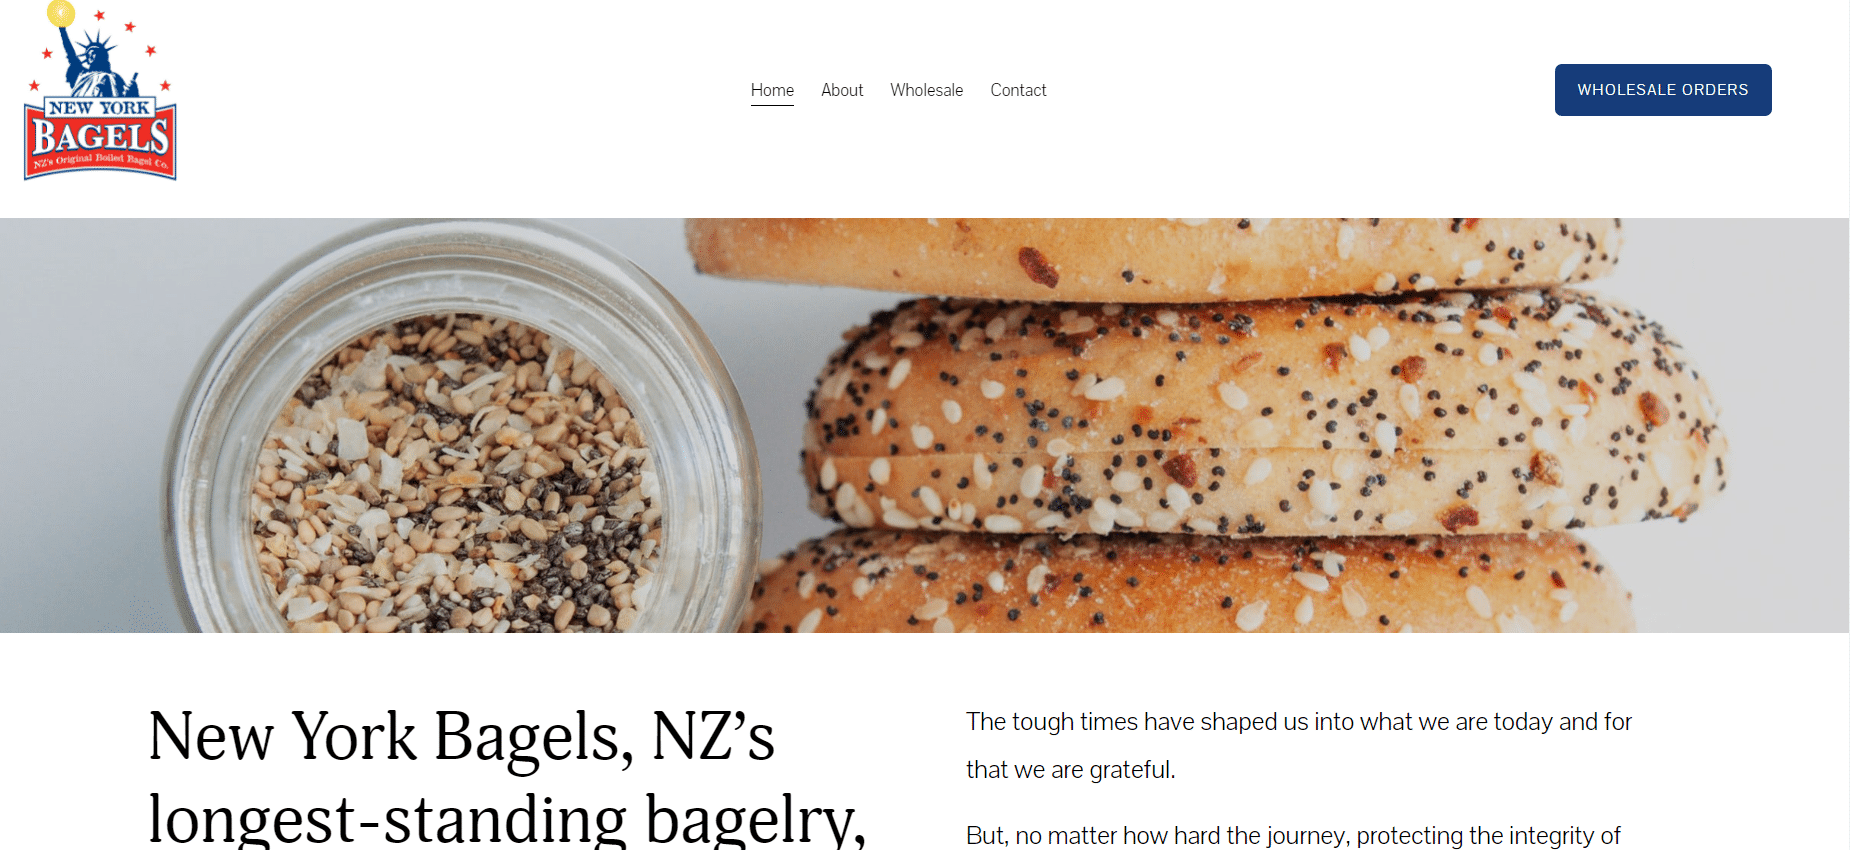 Google Ads Campaign - New York Bagels Auckland